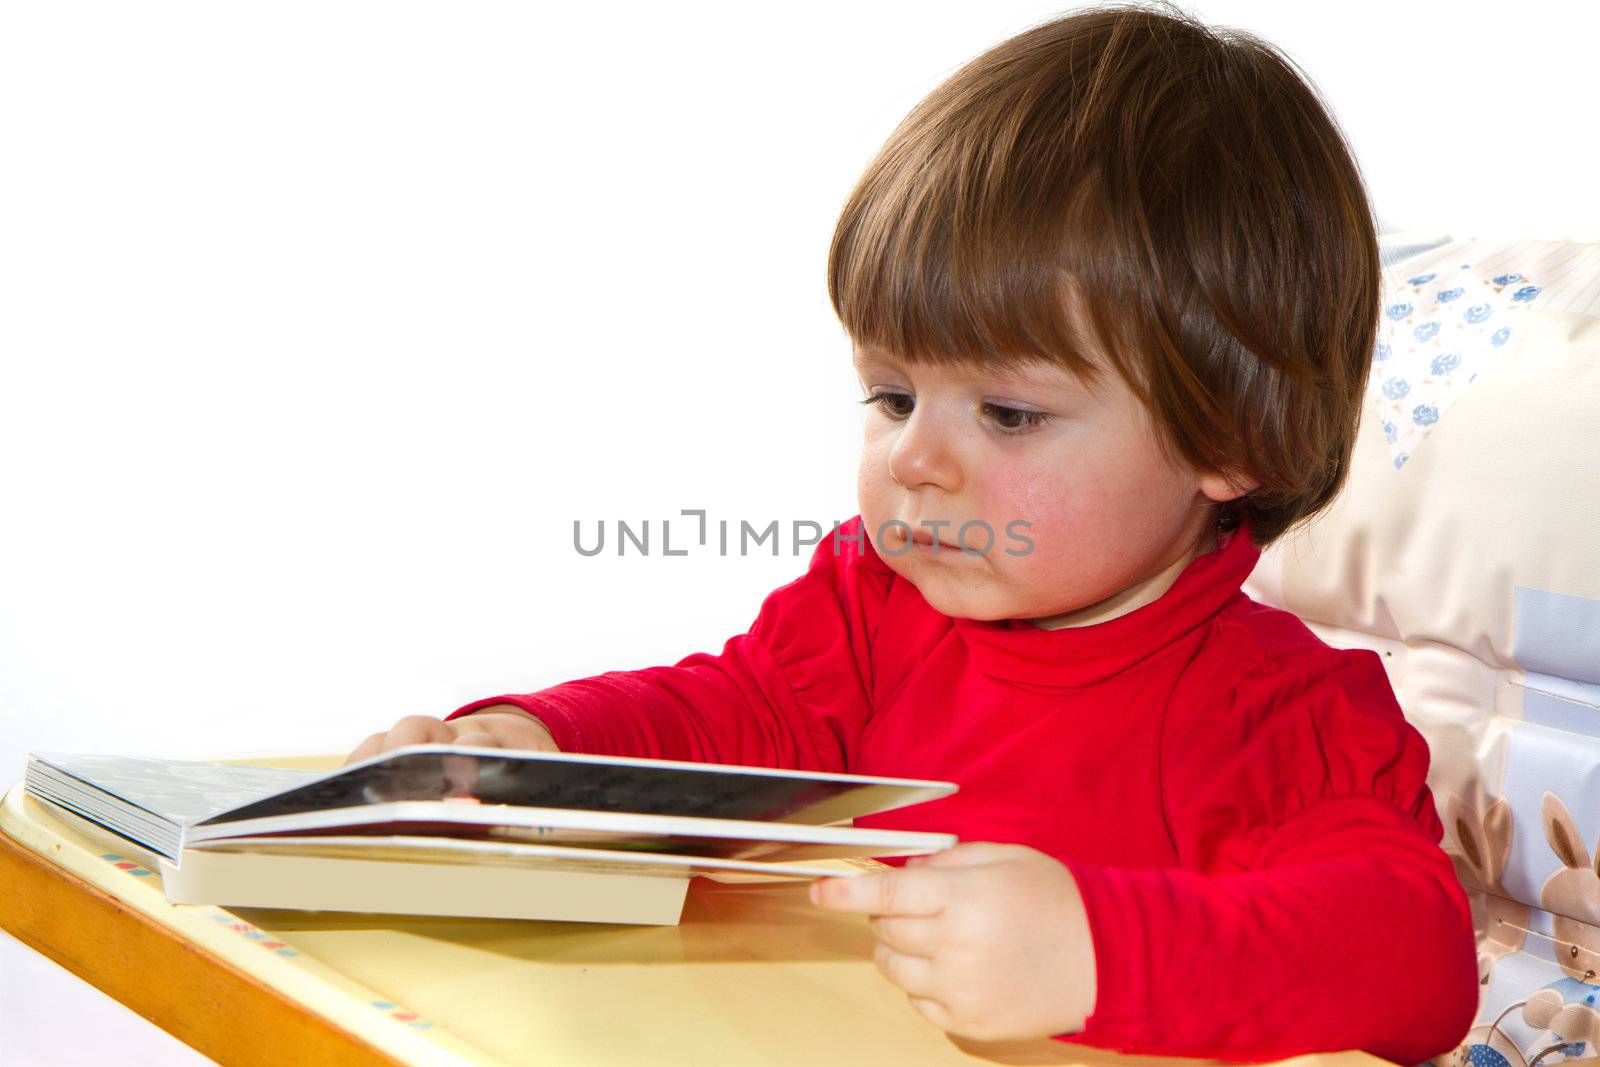 adorable one-year old baby reading a book by lsantilli